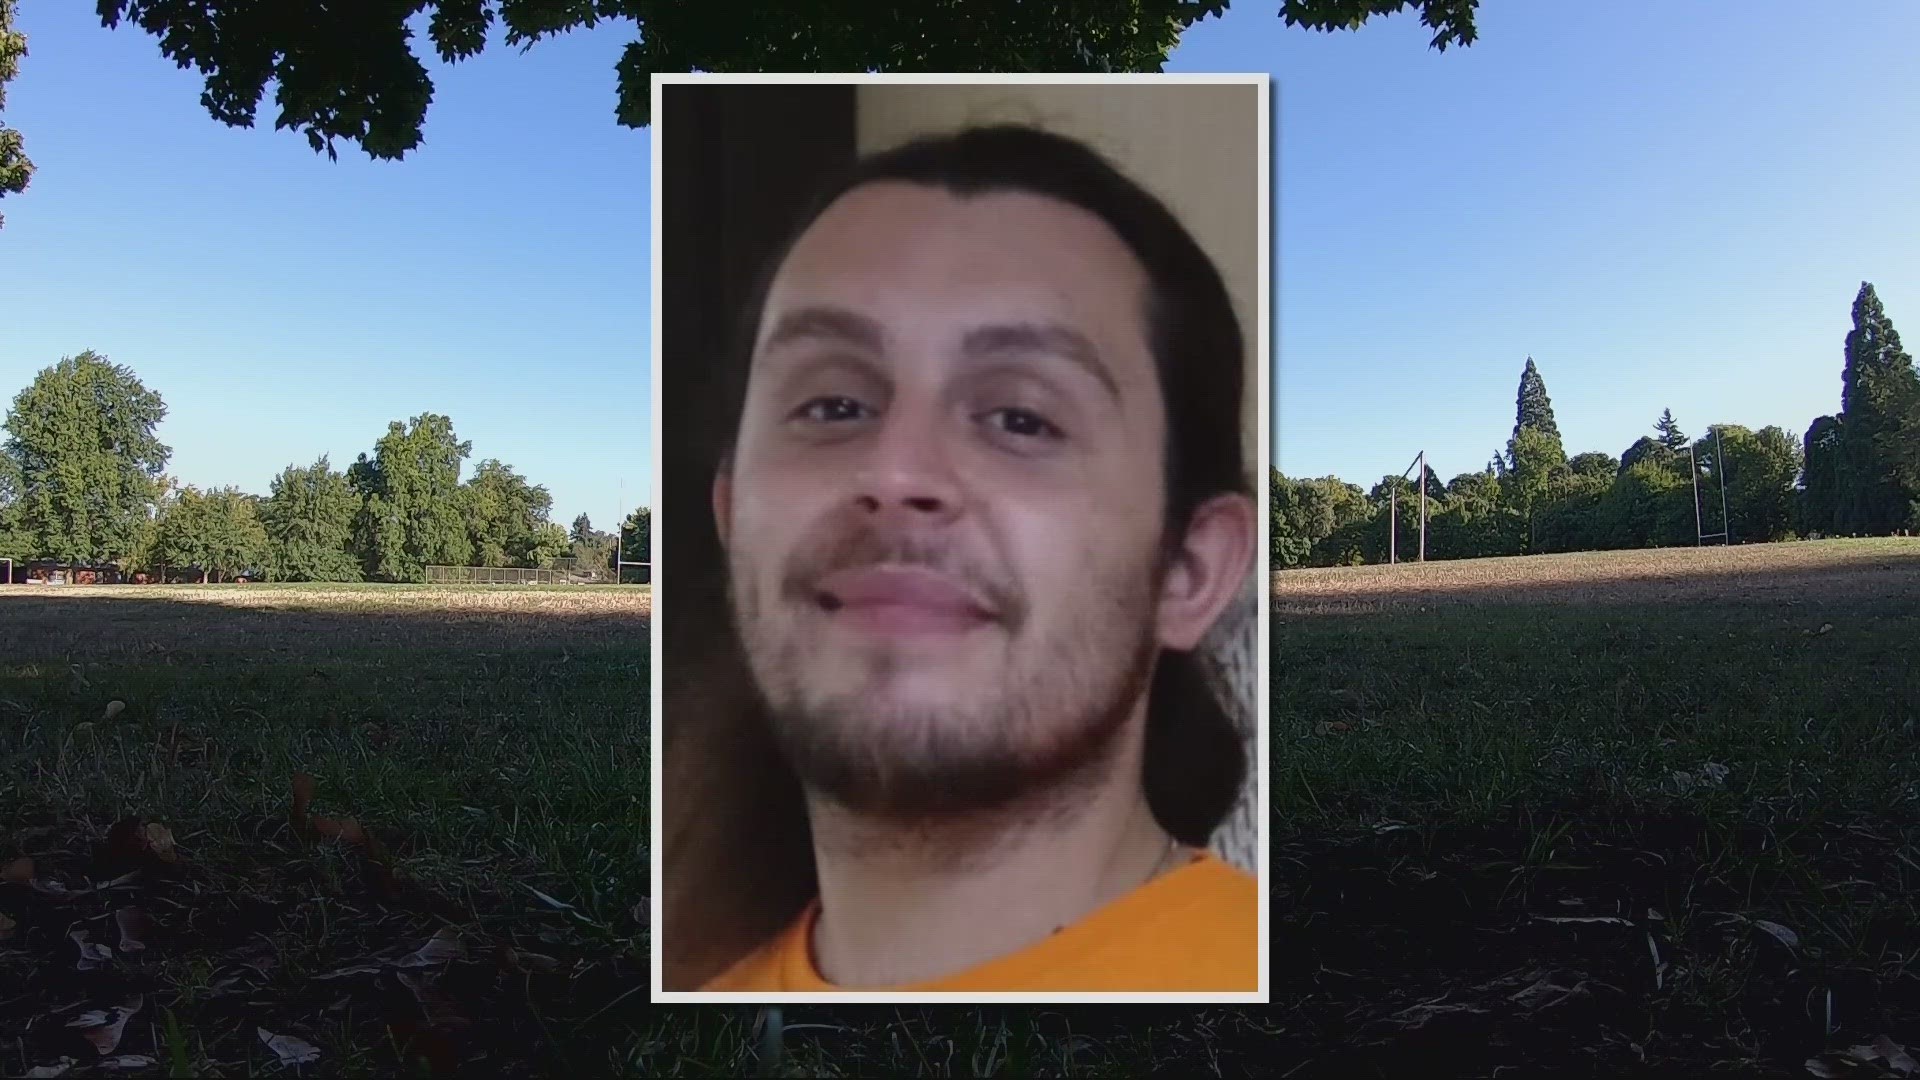 Adrian Perdomo, 26, was walking around Northgate Park in North Portland around 10 p.m., where he was later found dead with gun shot wounds on Aug 14, 2022.